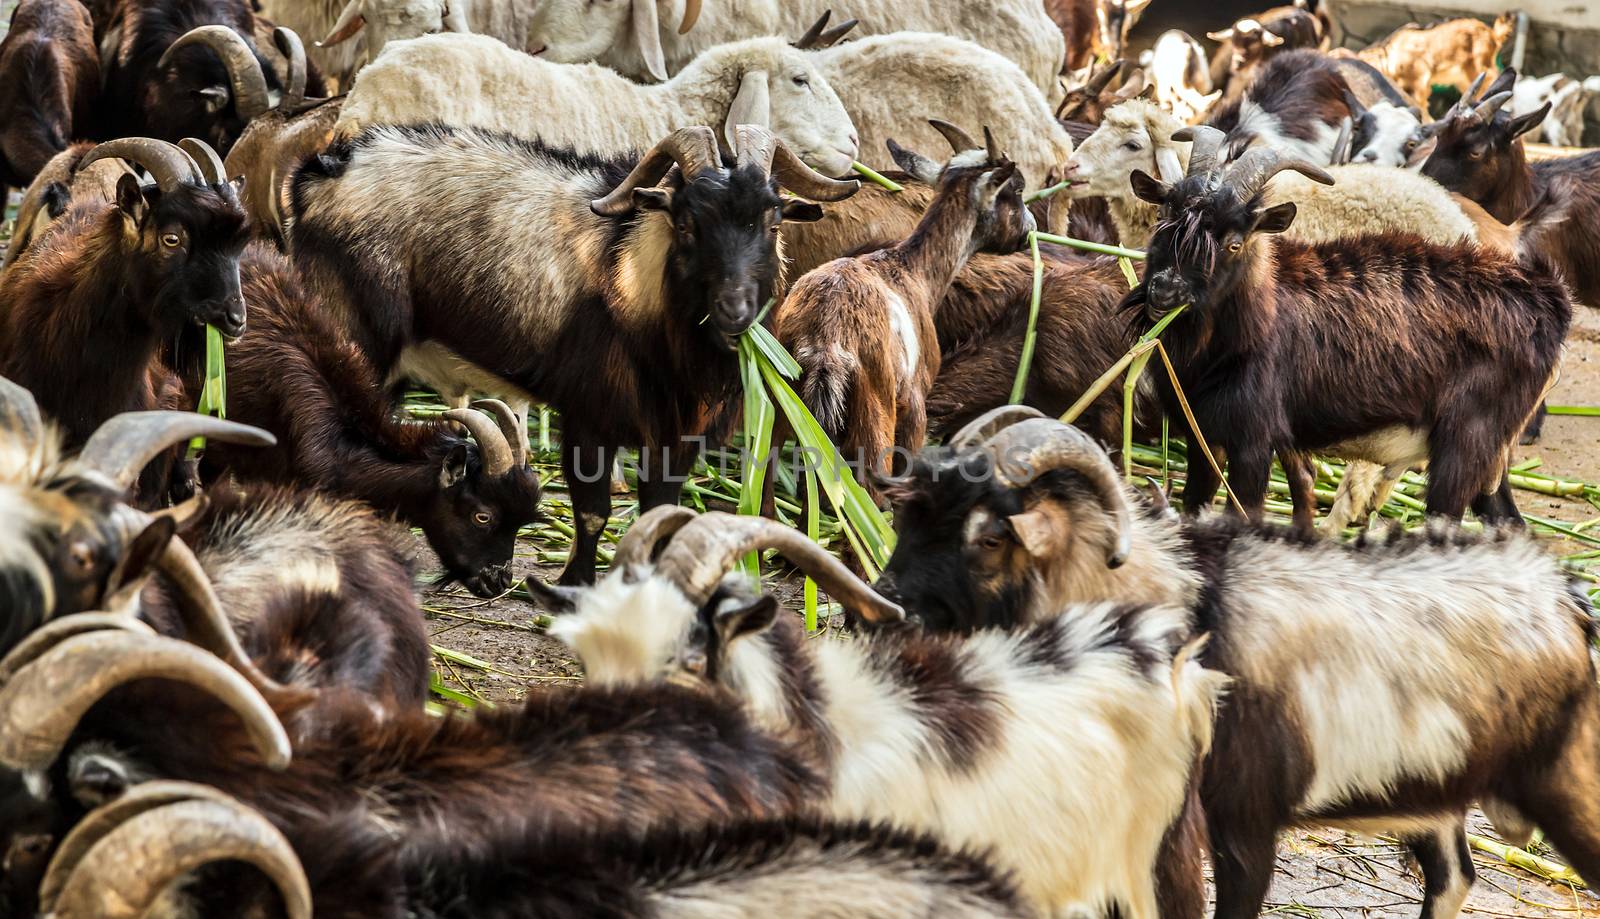 Goats eating grass in farm, mountain goats. goat with horns.